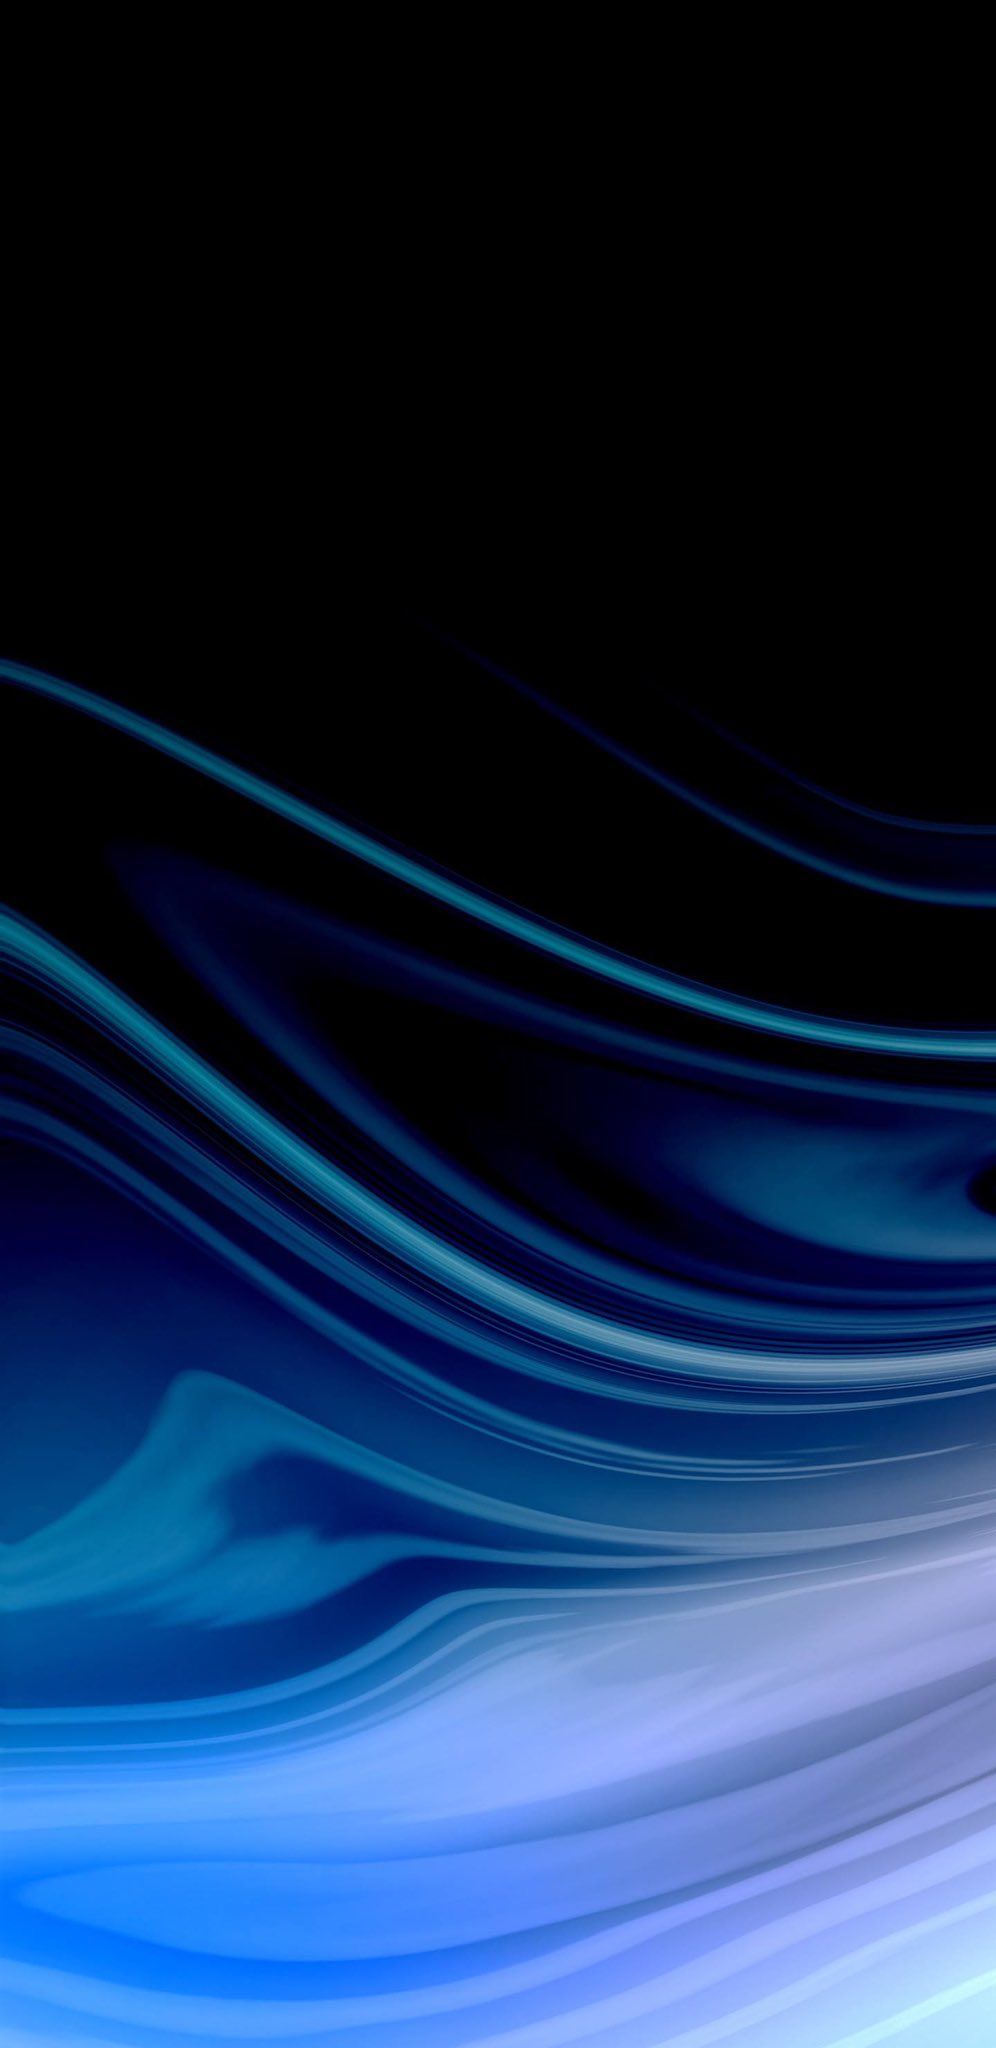 Navy Blue iPhone Wallpaper Free Navy Blue iPhone Background